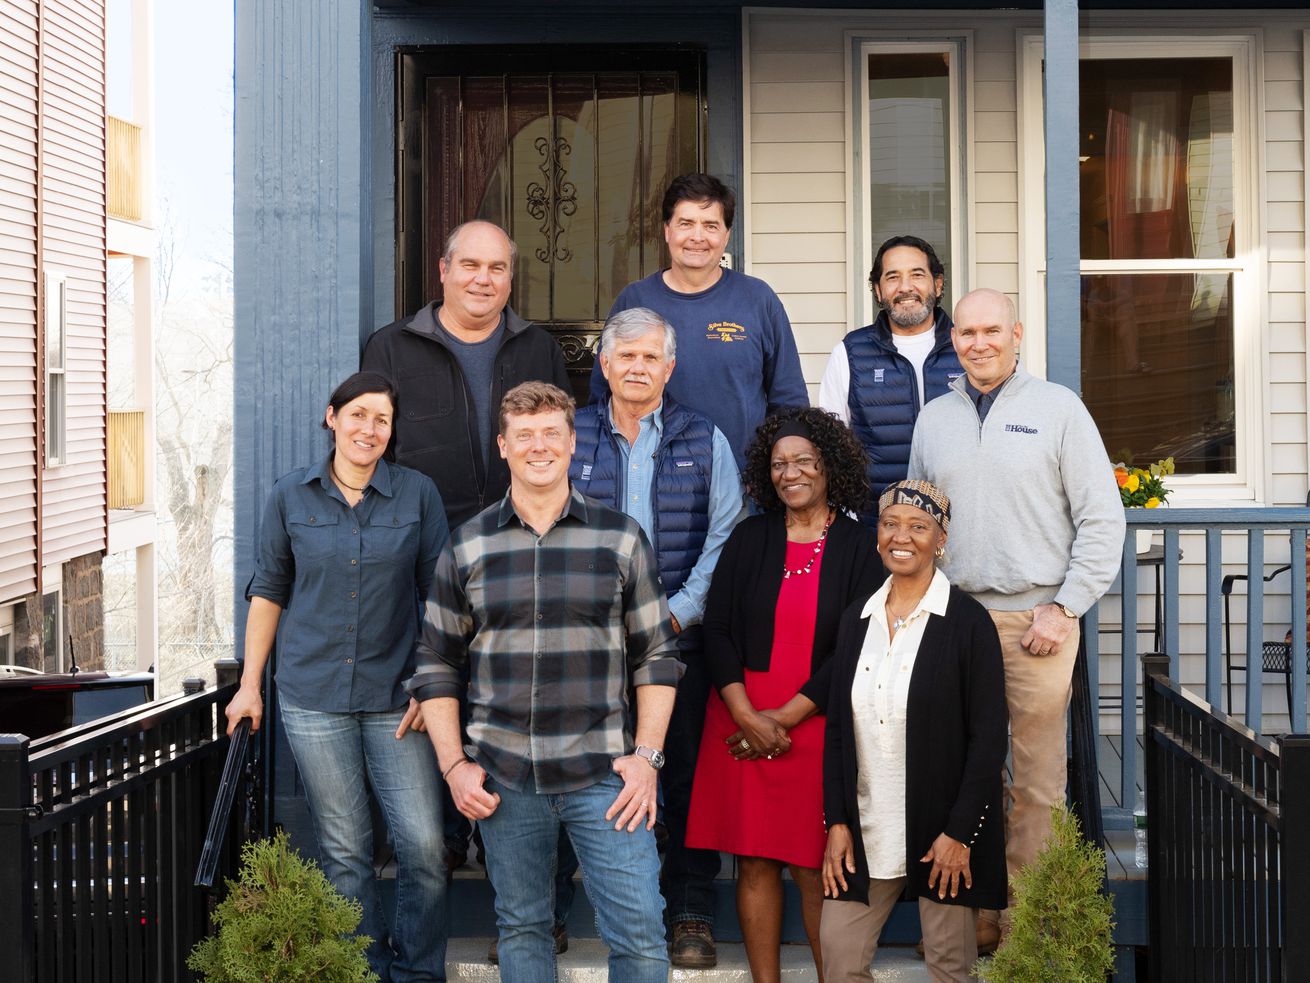 Fall 2021, Dorchester reveal, TOH crew and homeowners in front